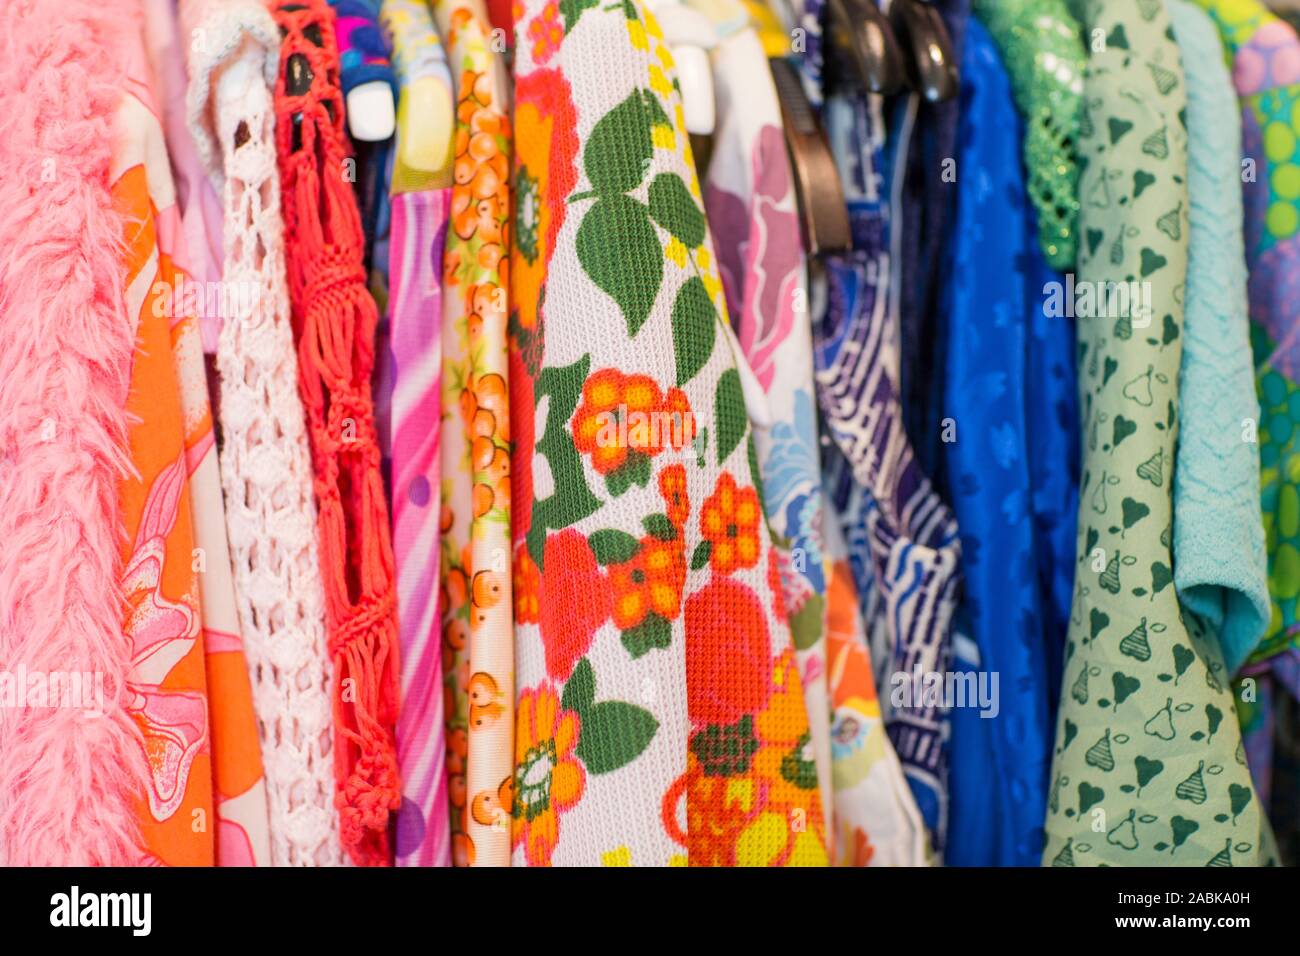 Sideview of some colorful vintage clothes with different patterns, colors and textures hanging on a rack. Thrift, second hand, circular economy, recyc Stock Photo